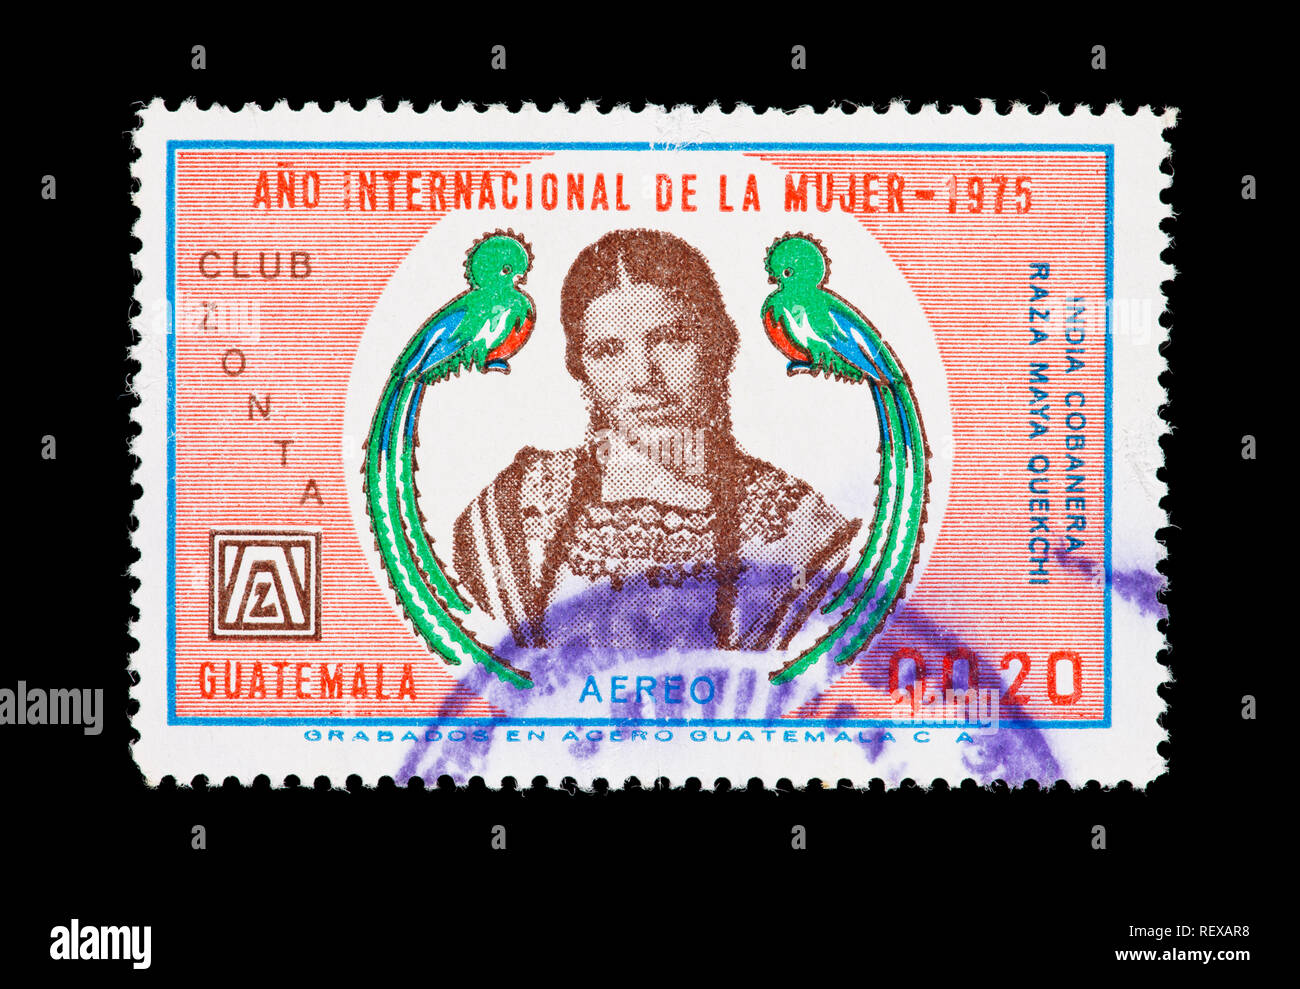 Postage stamp from Guatemala depicting two quetzals and Maya Quekchi woman wearing Huipil, issued for International Women's Year, 1975. Stock Photo